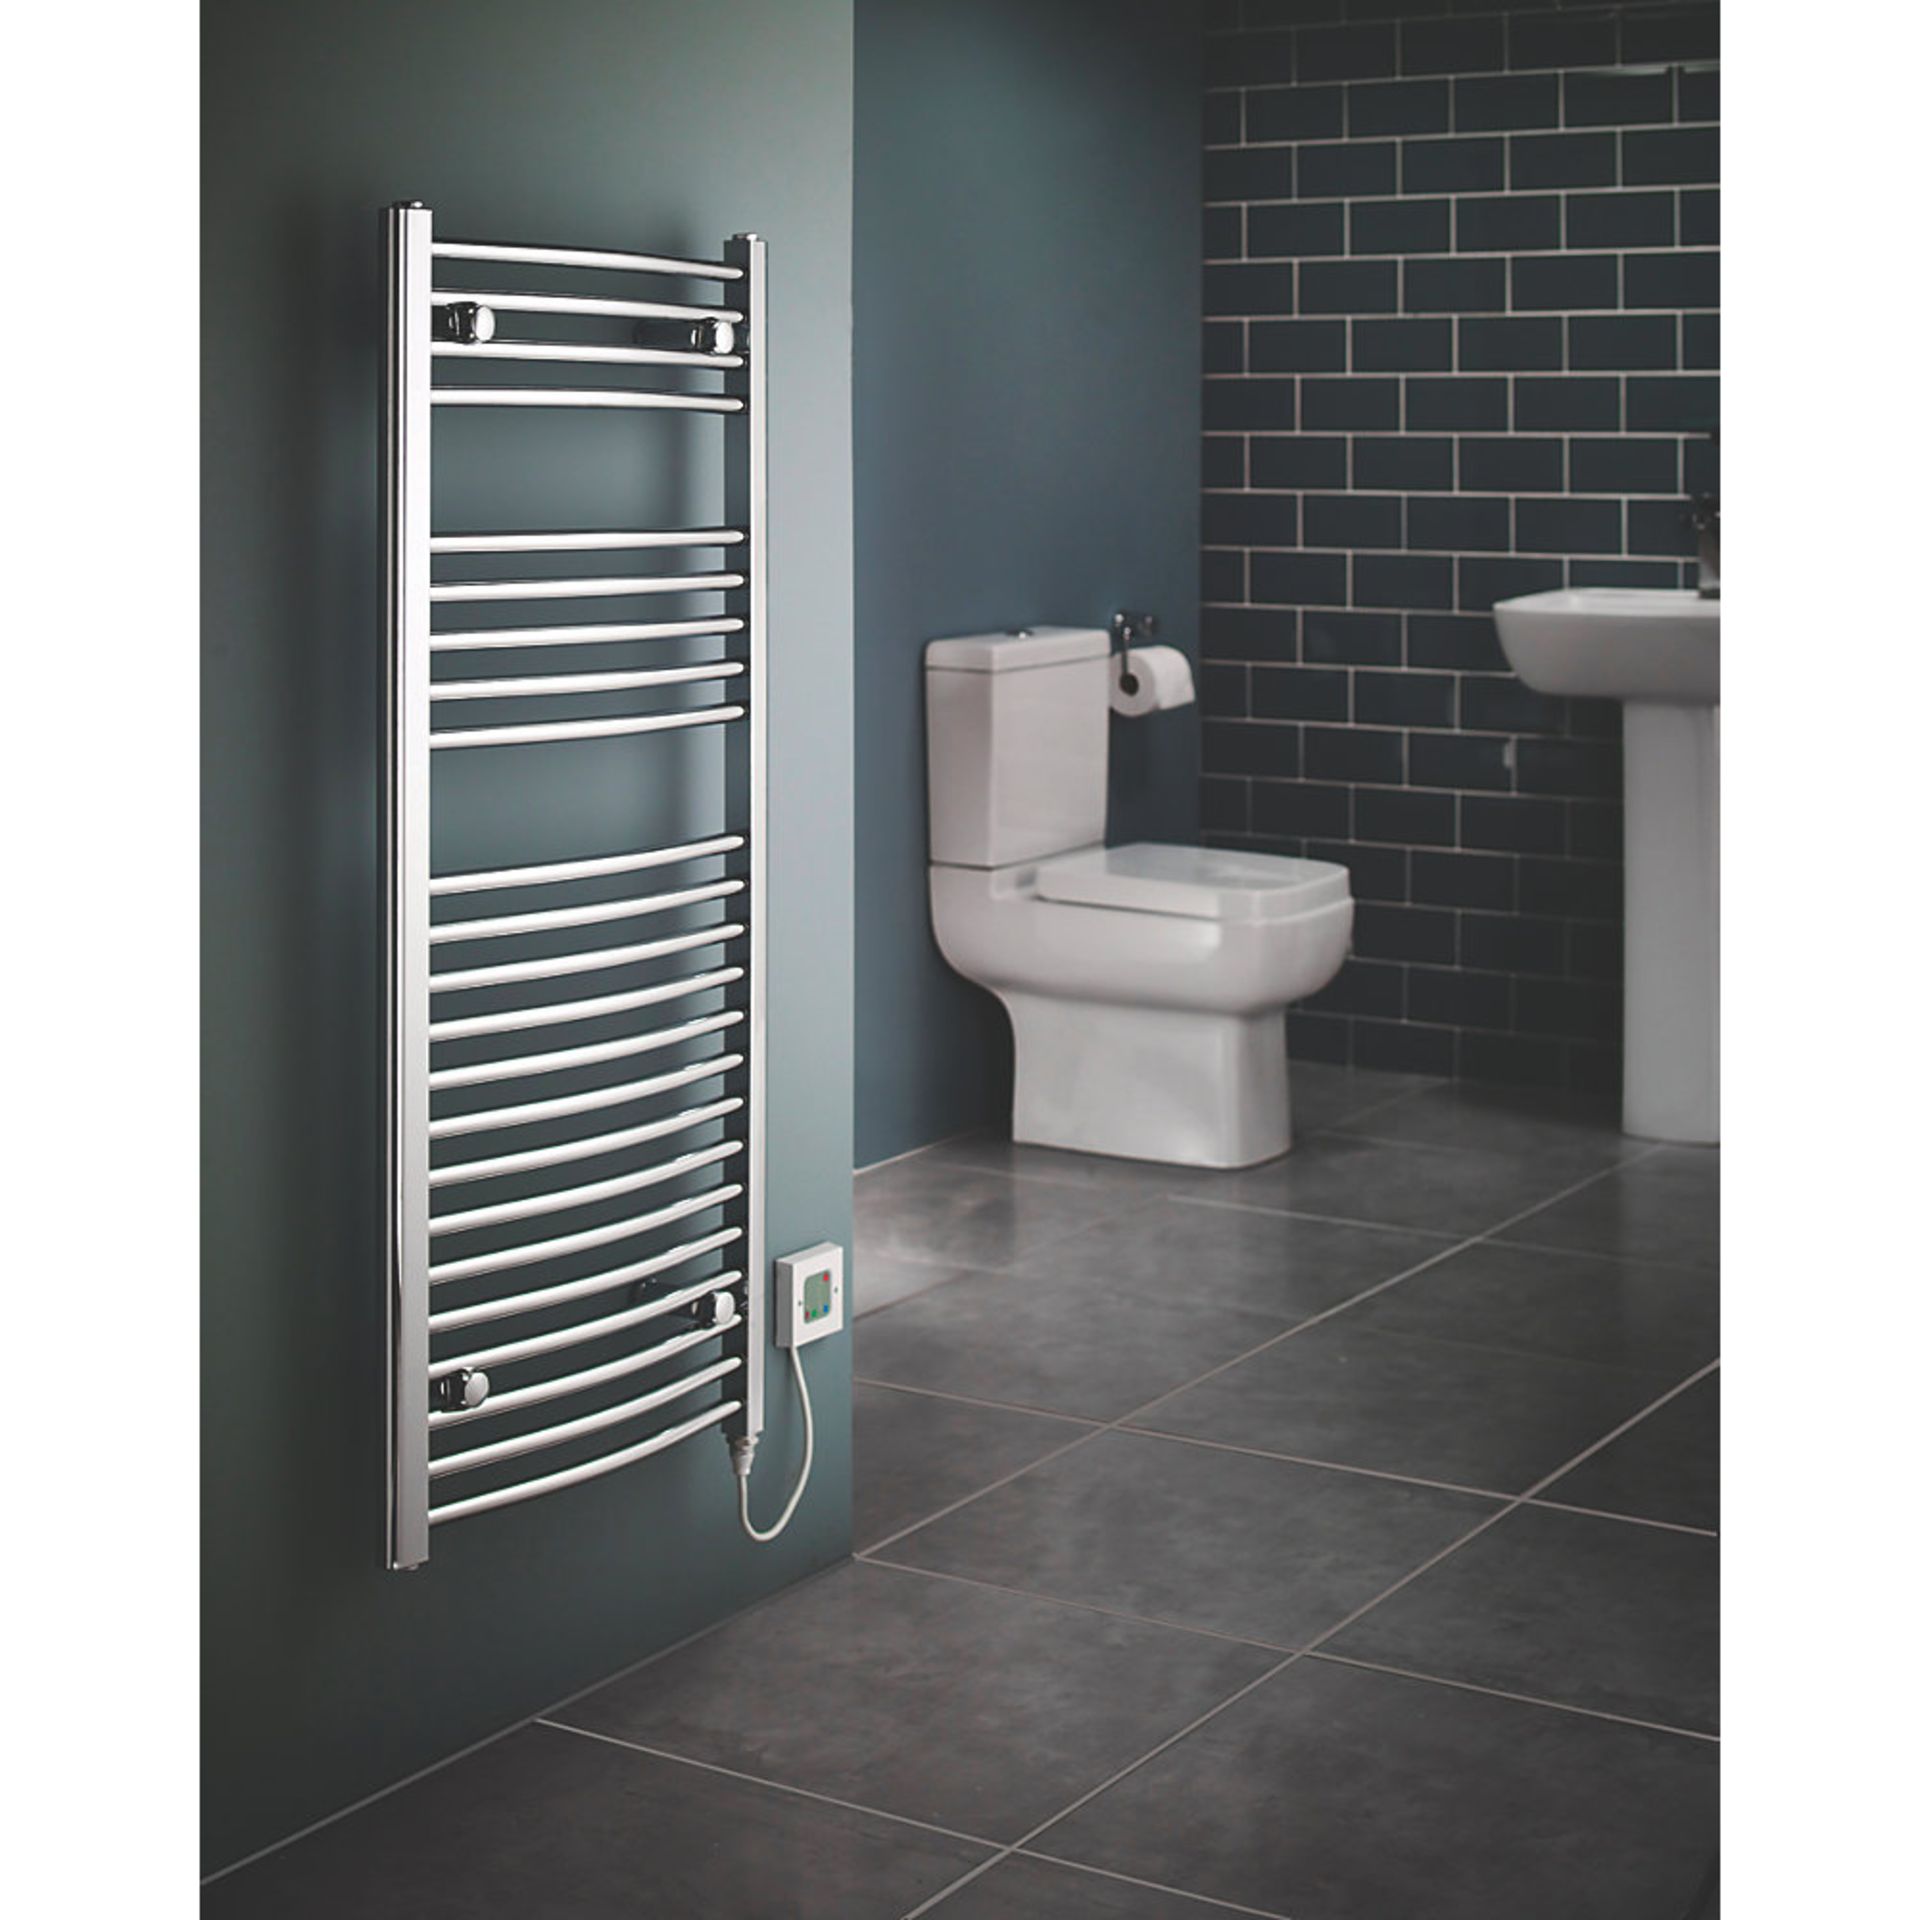 (H34) 1100x500mm FLOMASTA CURVED ELECTRIC TOWEL RADIATOR CHROME. Electrical installation only. ... - Image 3 of 5